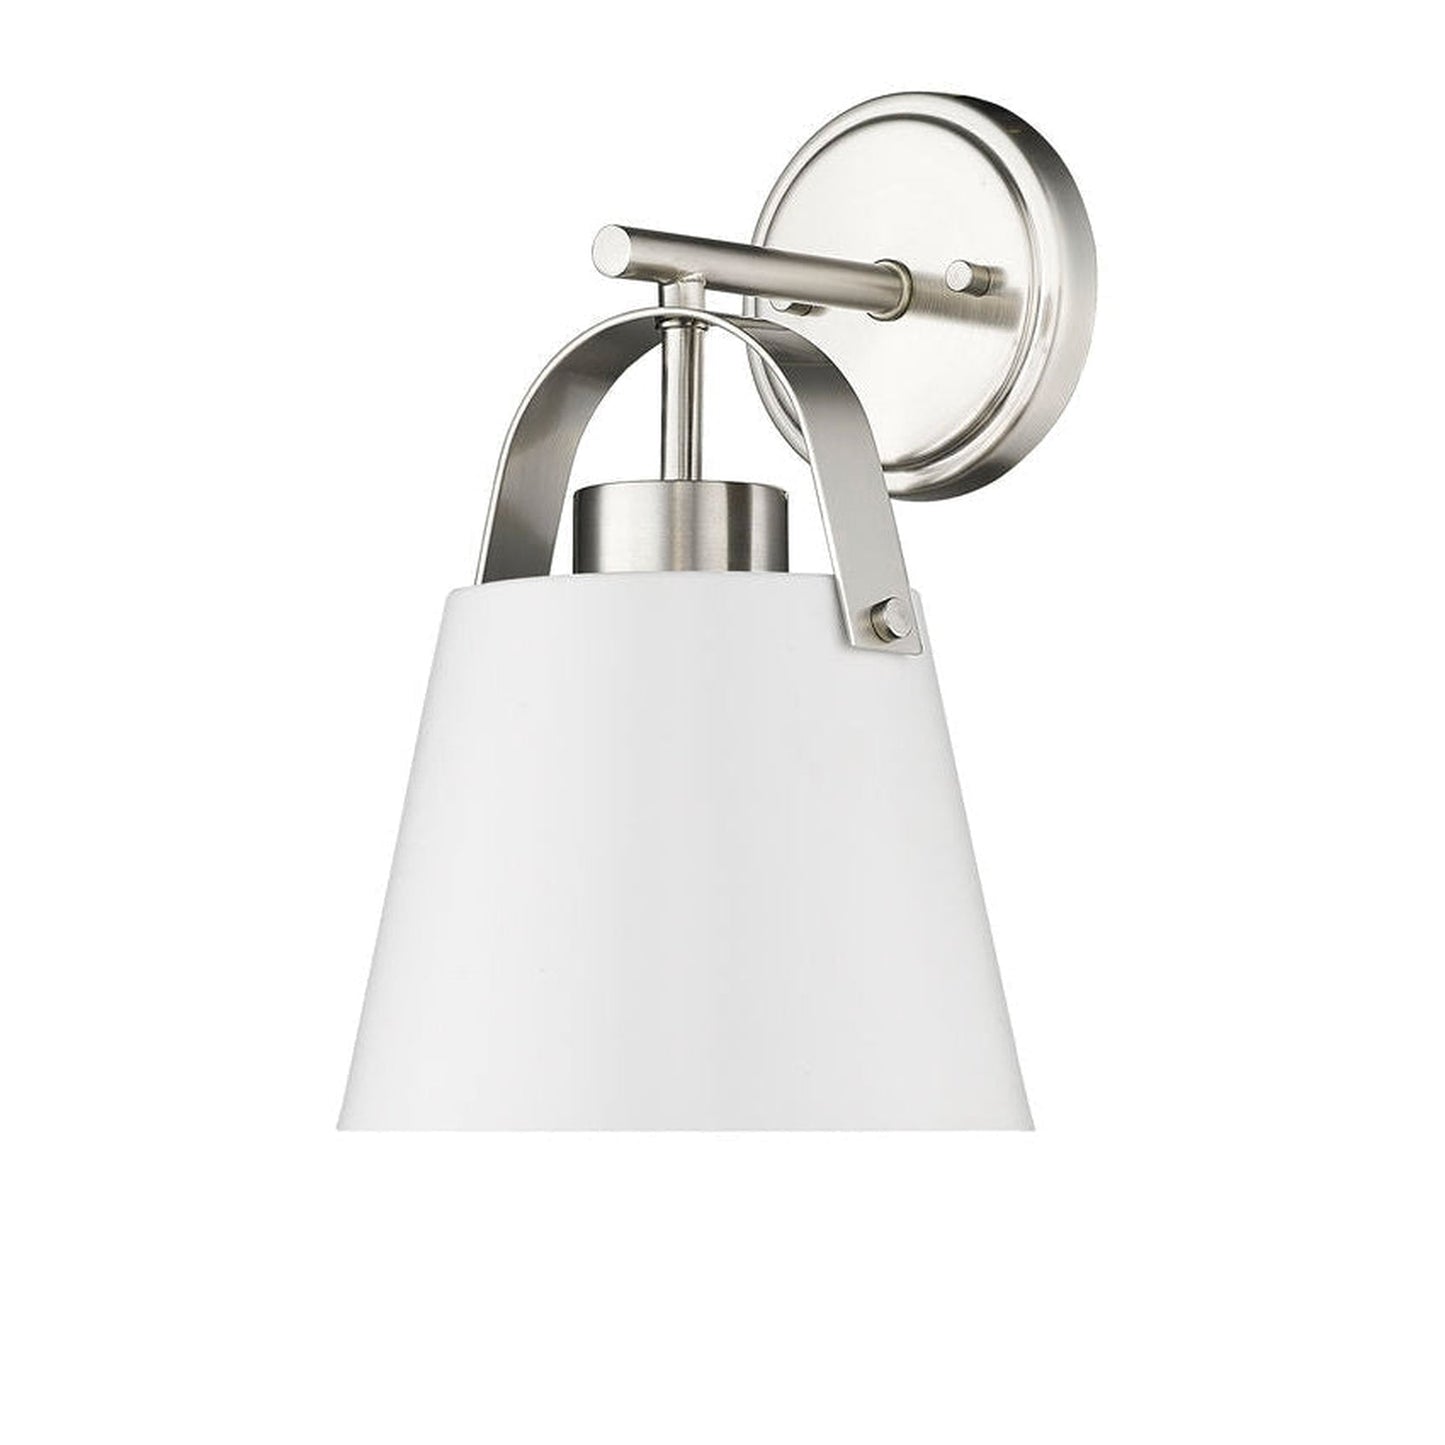 Z-Lite Z-Studio 8" 1-Light Matte White and Brushed Nickel Wall Sconce With Matte White Steel Shade